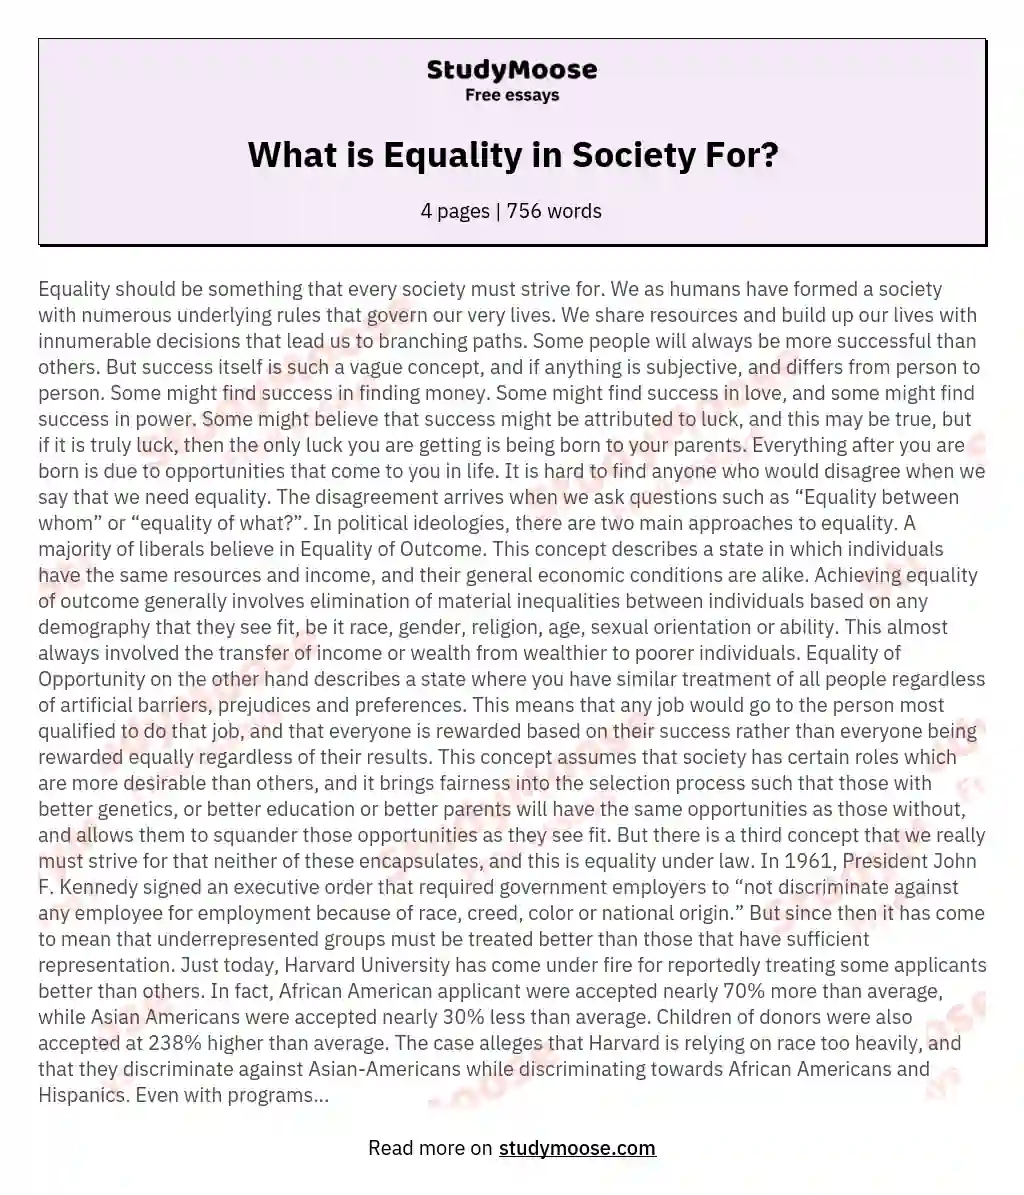 What is Equality in Society For?